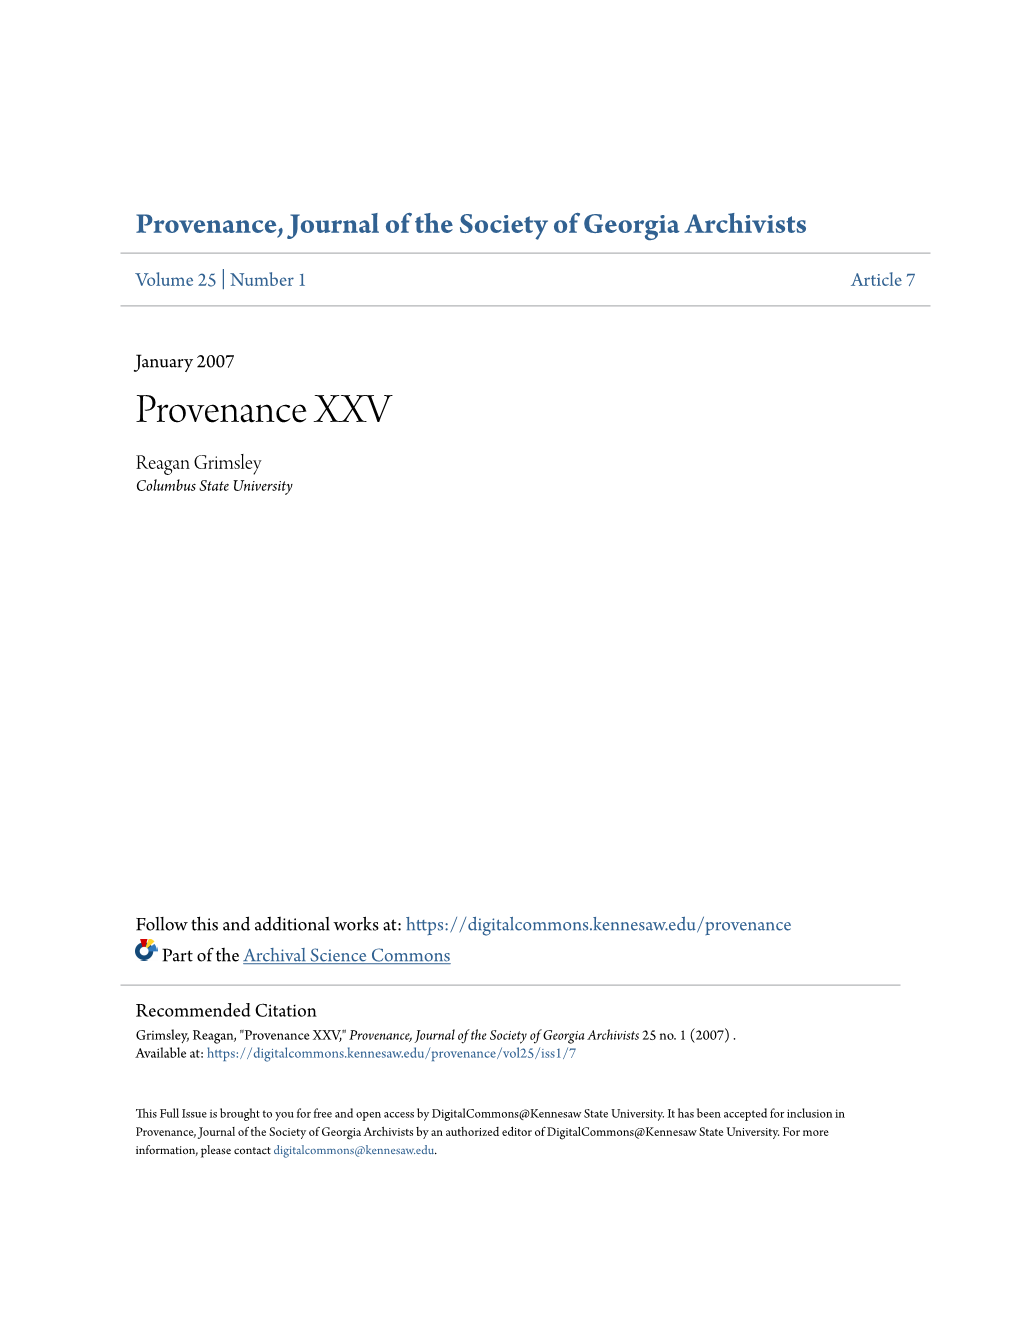 Provenance, Journal of the Society of Georgia Archivists